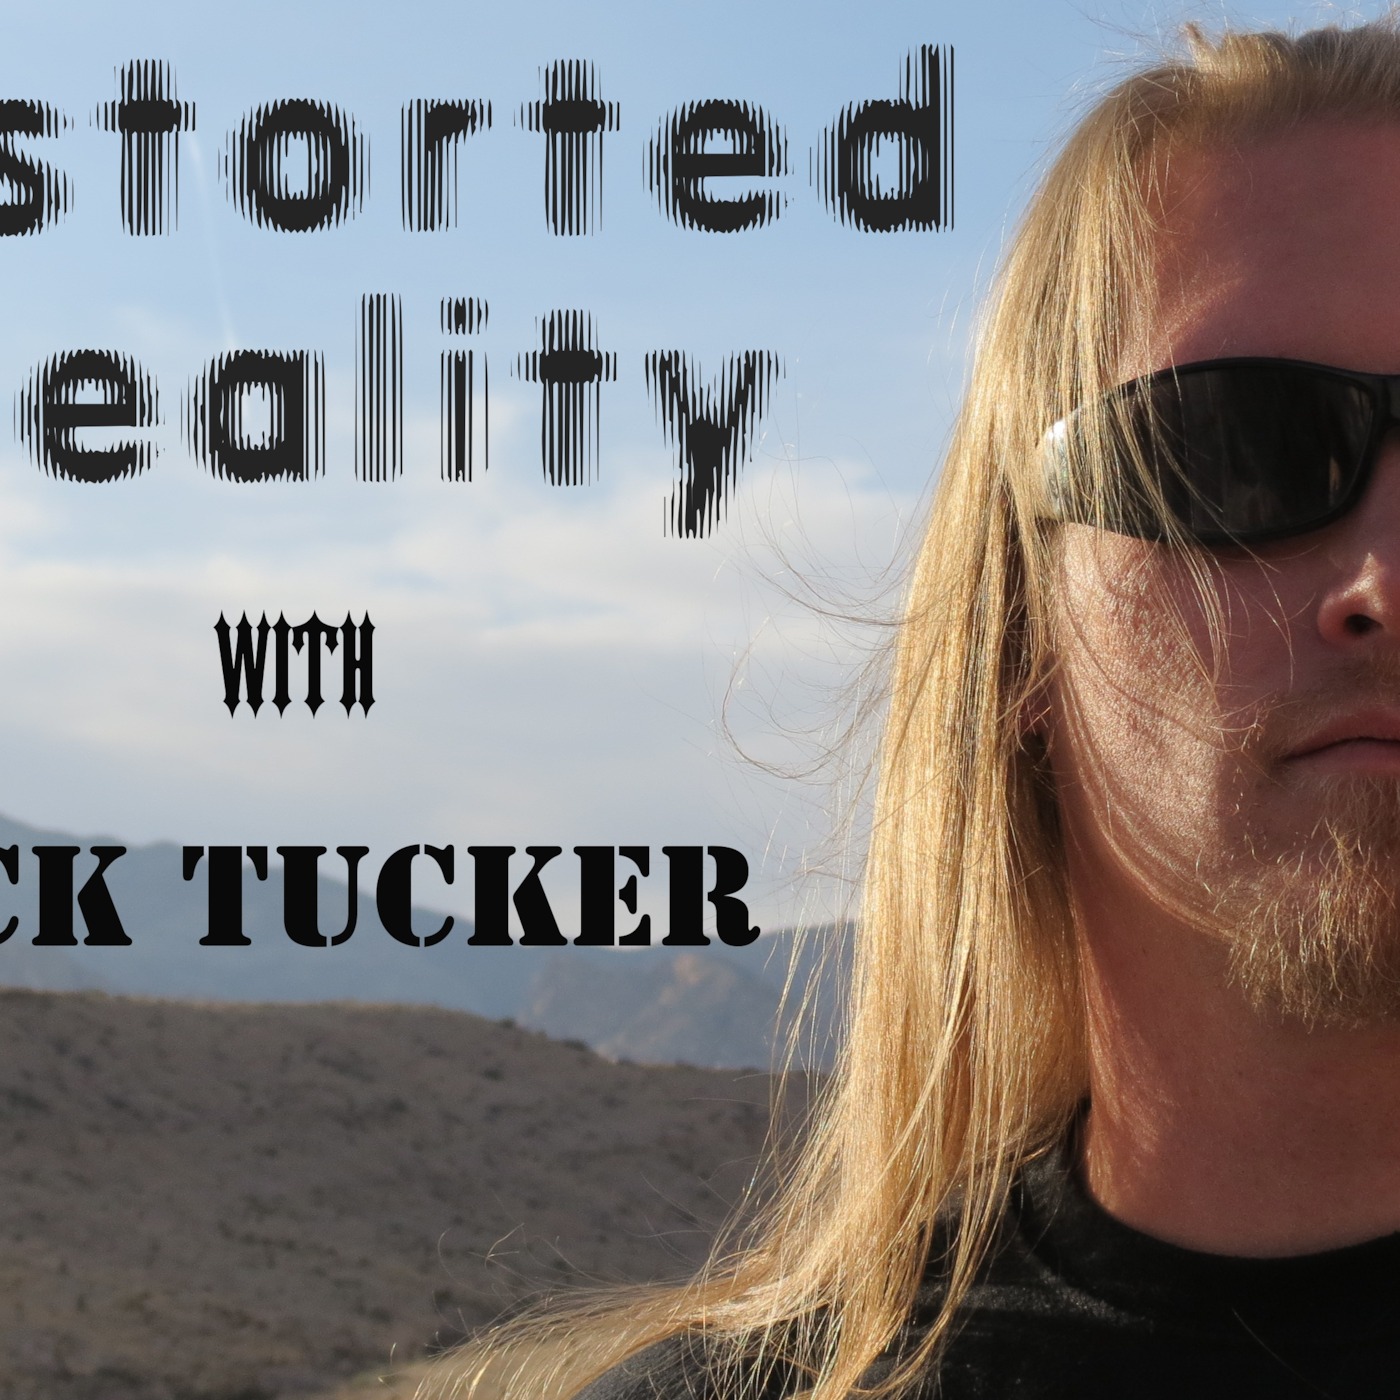 Distorted Reality with Nick Tucker